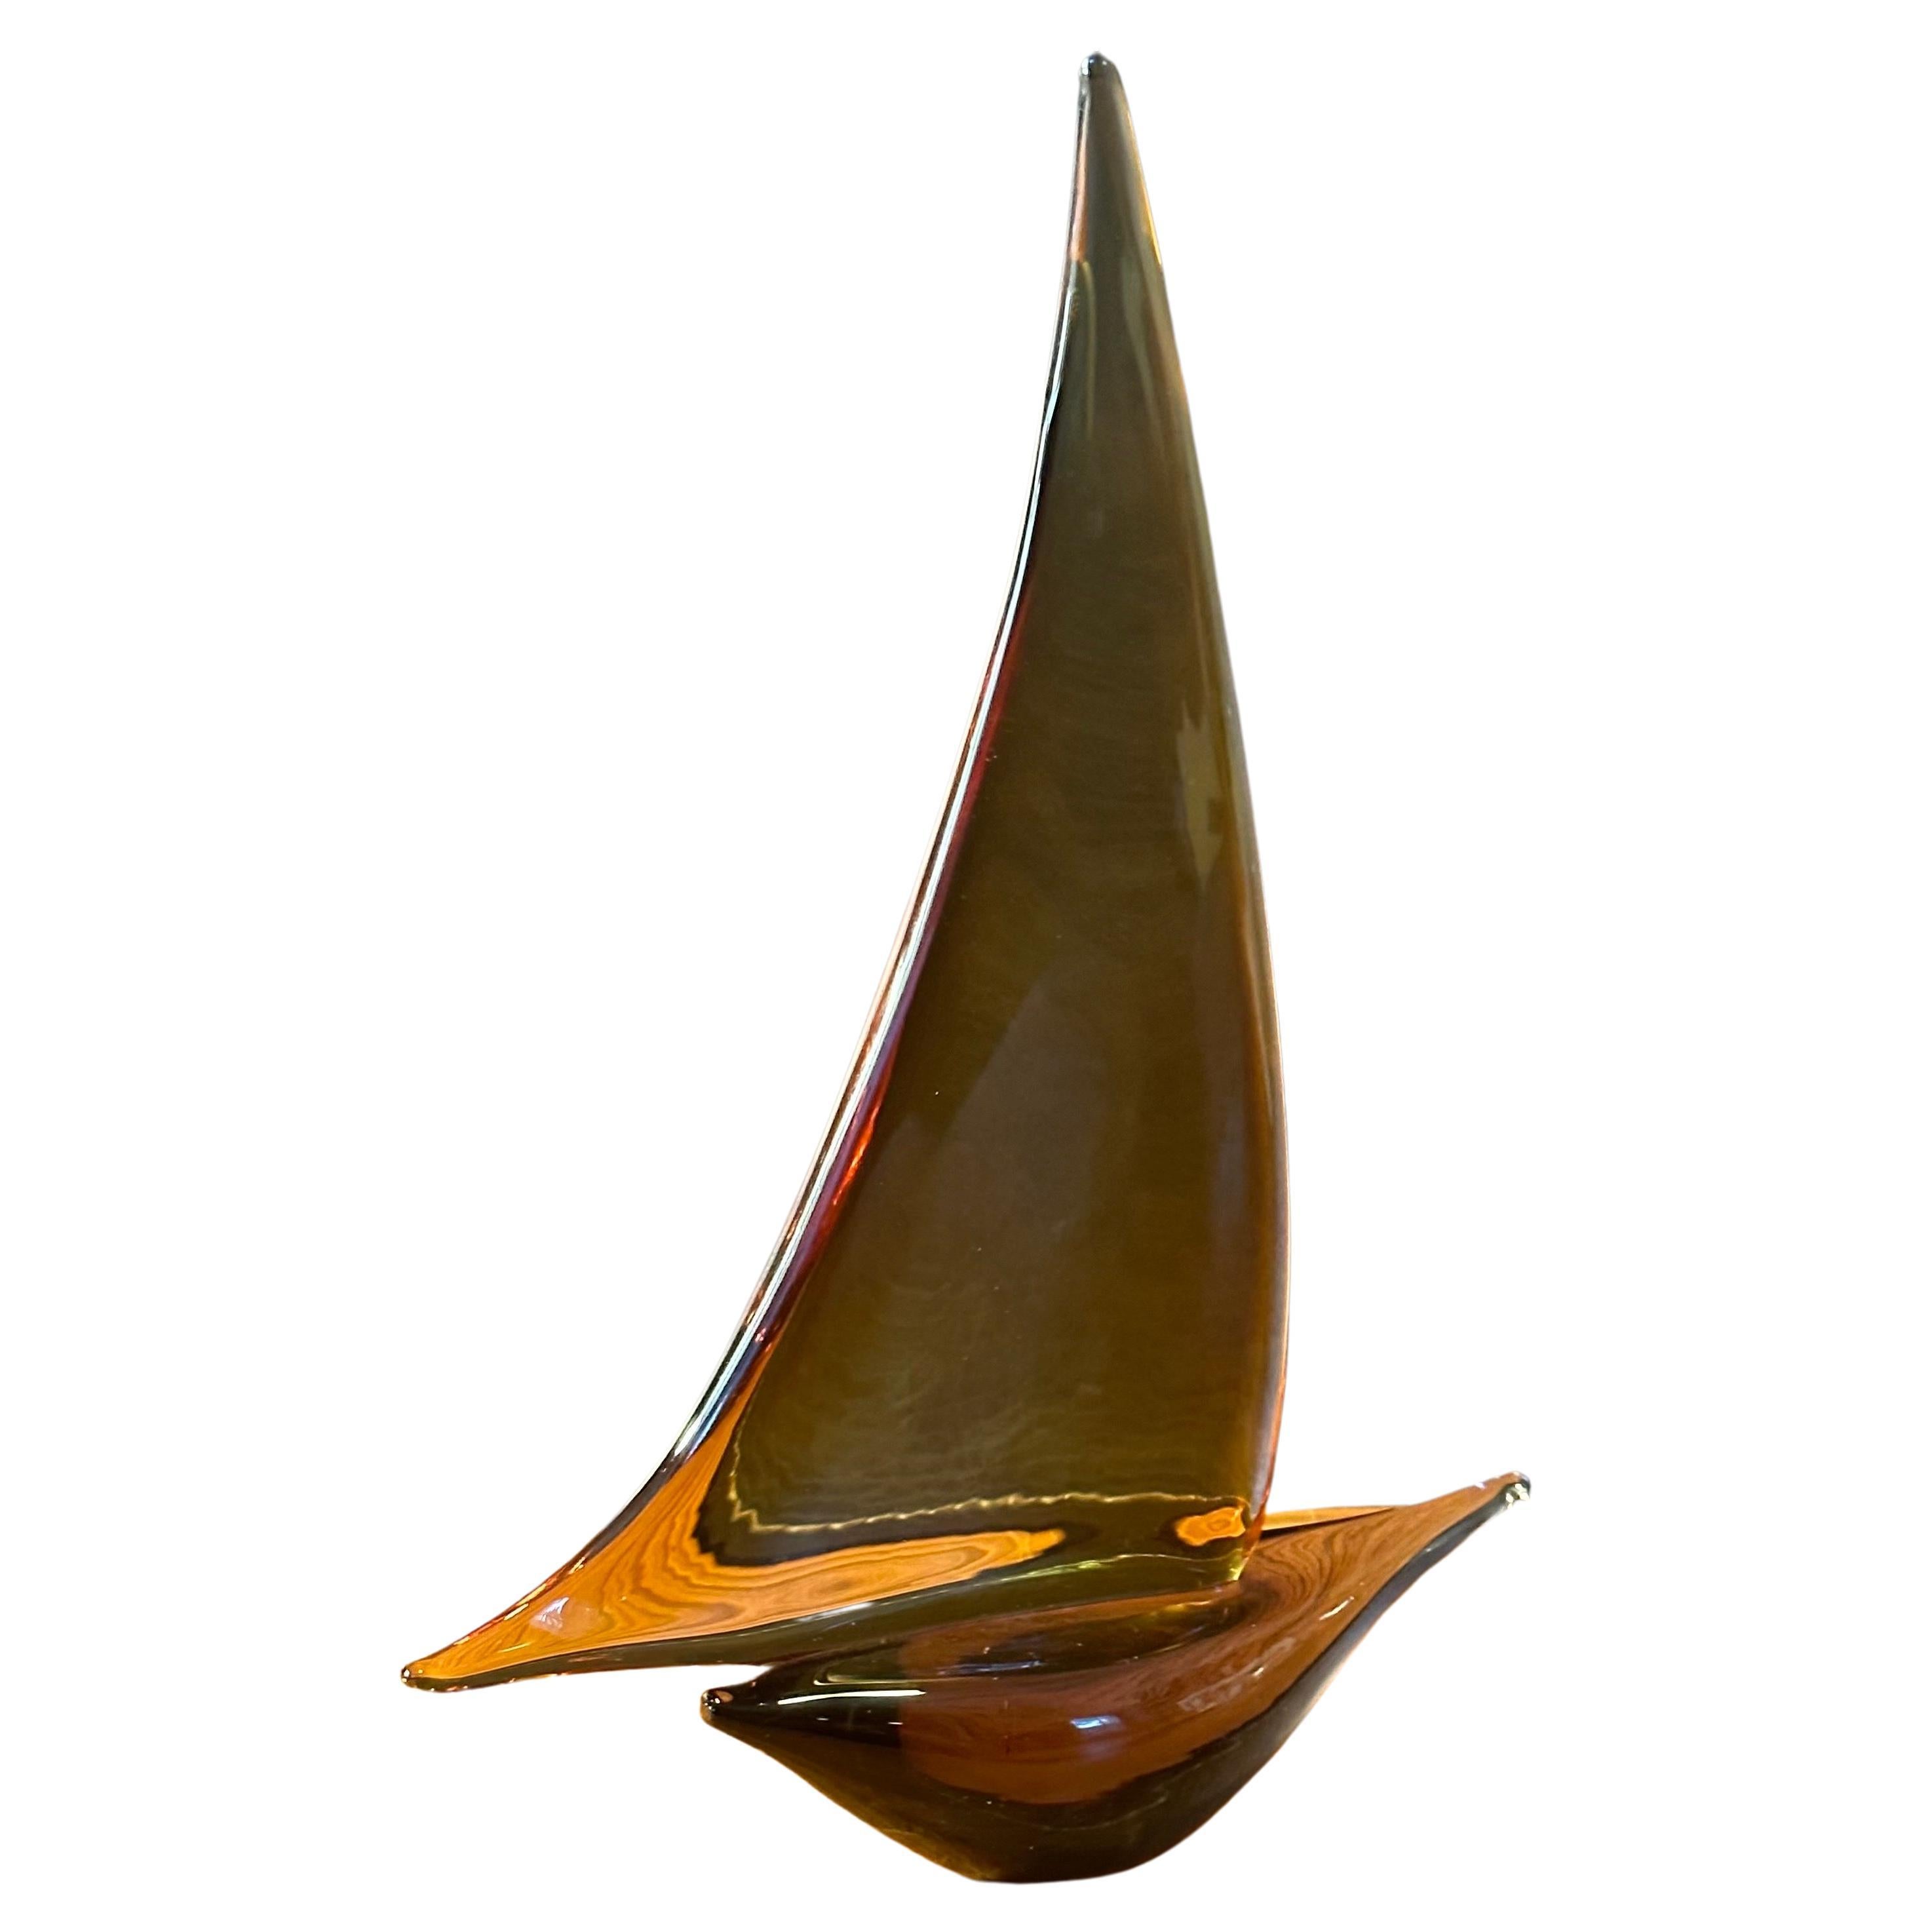 Sleek sailboat sculpture in amber art glass by Murano Glass, circa 1970s. The sailboat is in very good vintage condition with no chips or cracks and measures 9.5